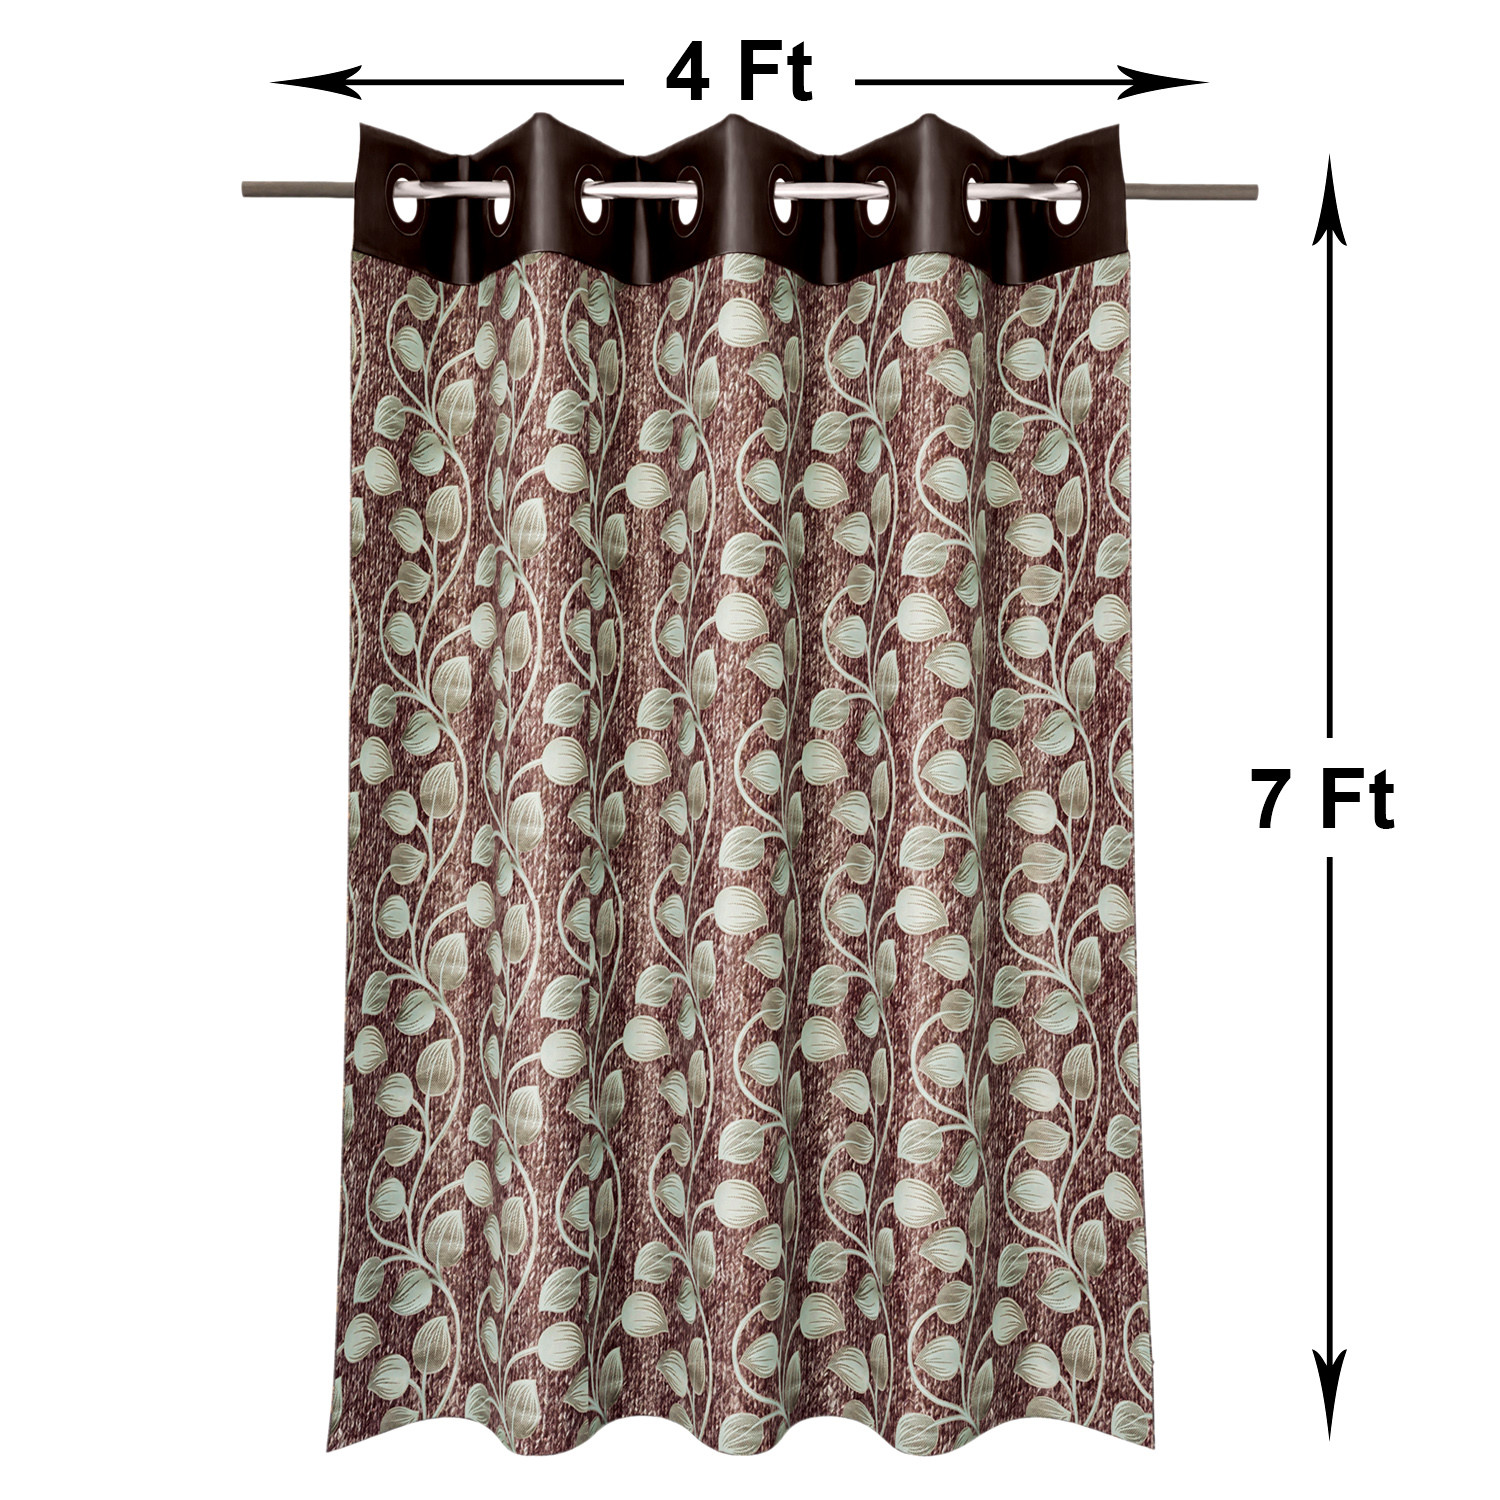 Kuber Industries Silk Decorative 7 Feet Door Curtain | Leaf Print Blackout Drapes Curtain With 8 Eyelet For Home & Office (Brown)